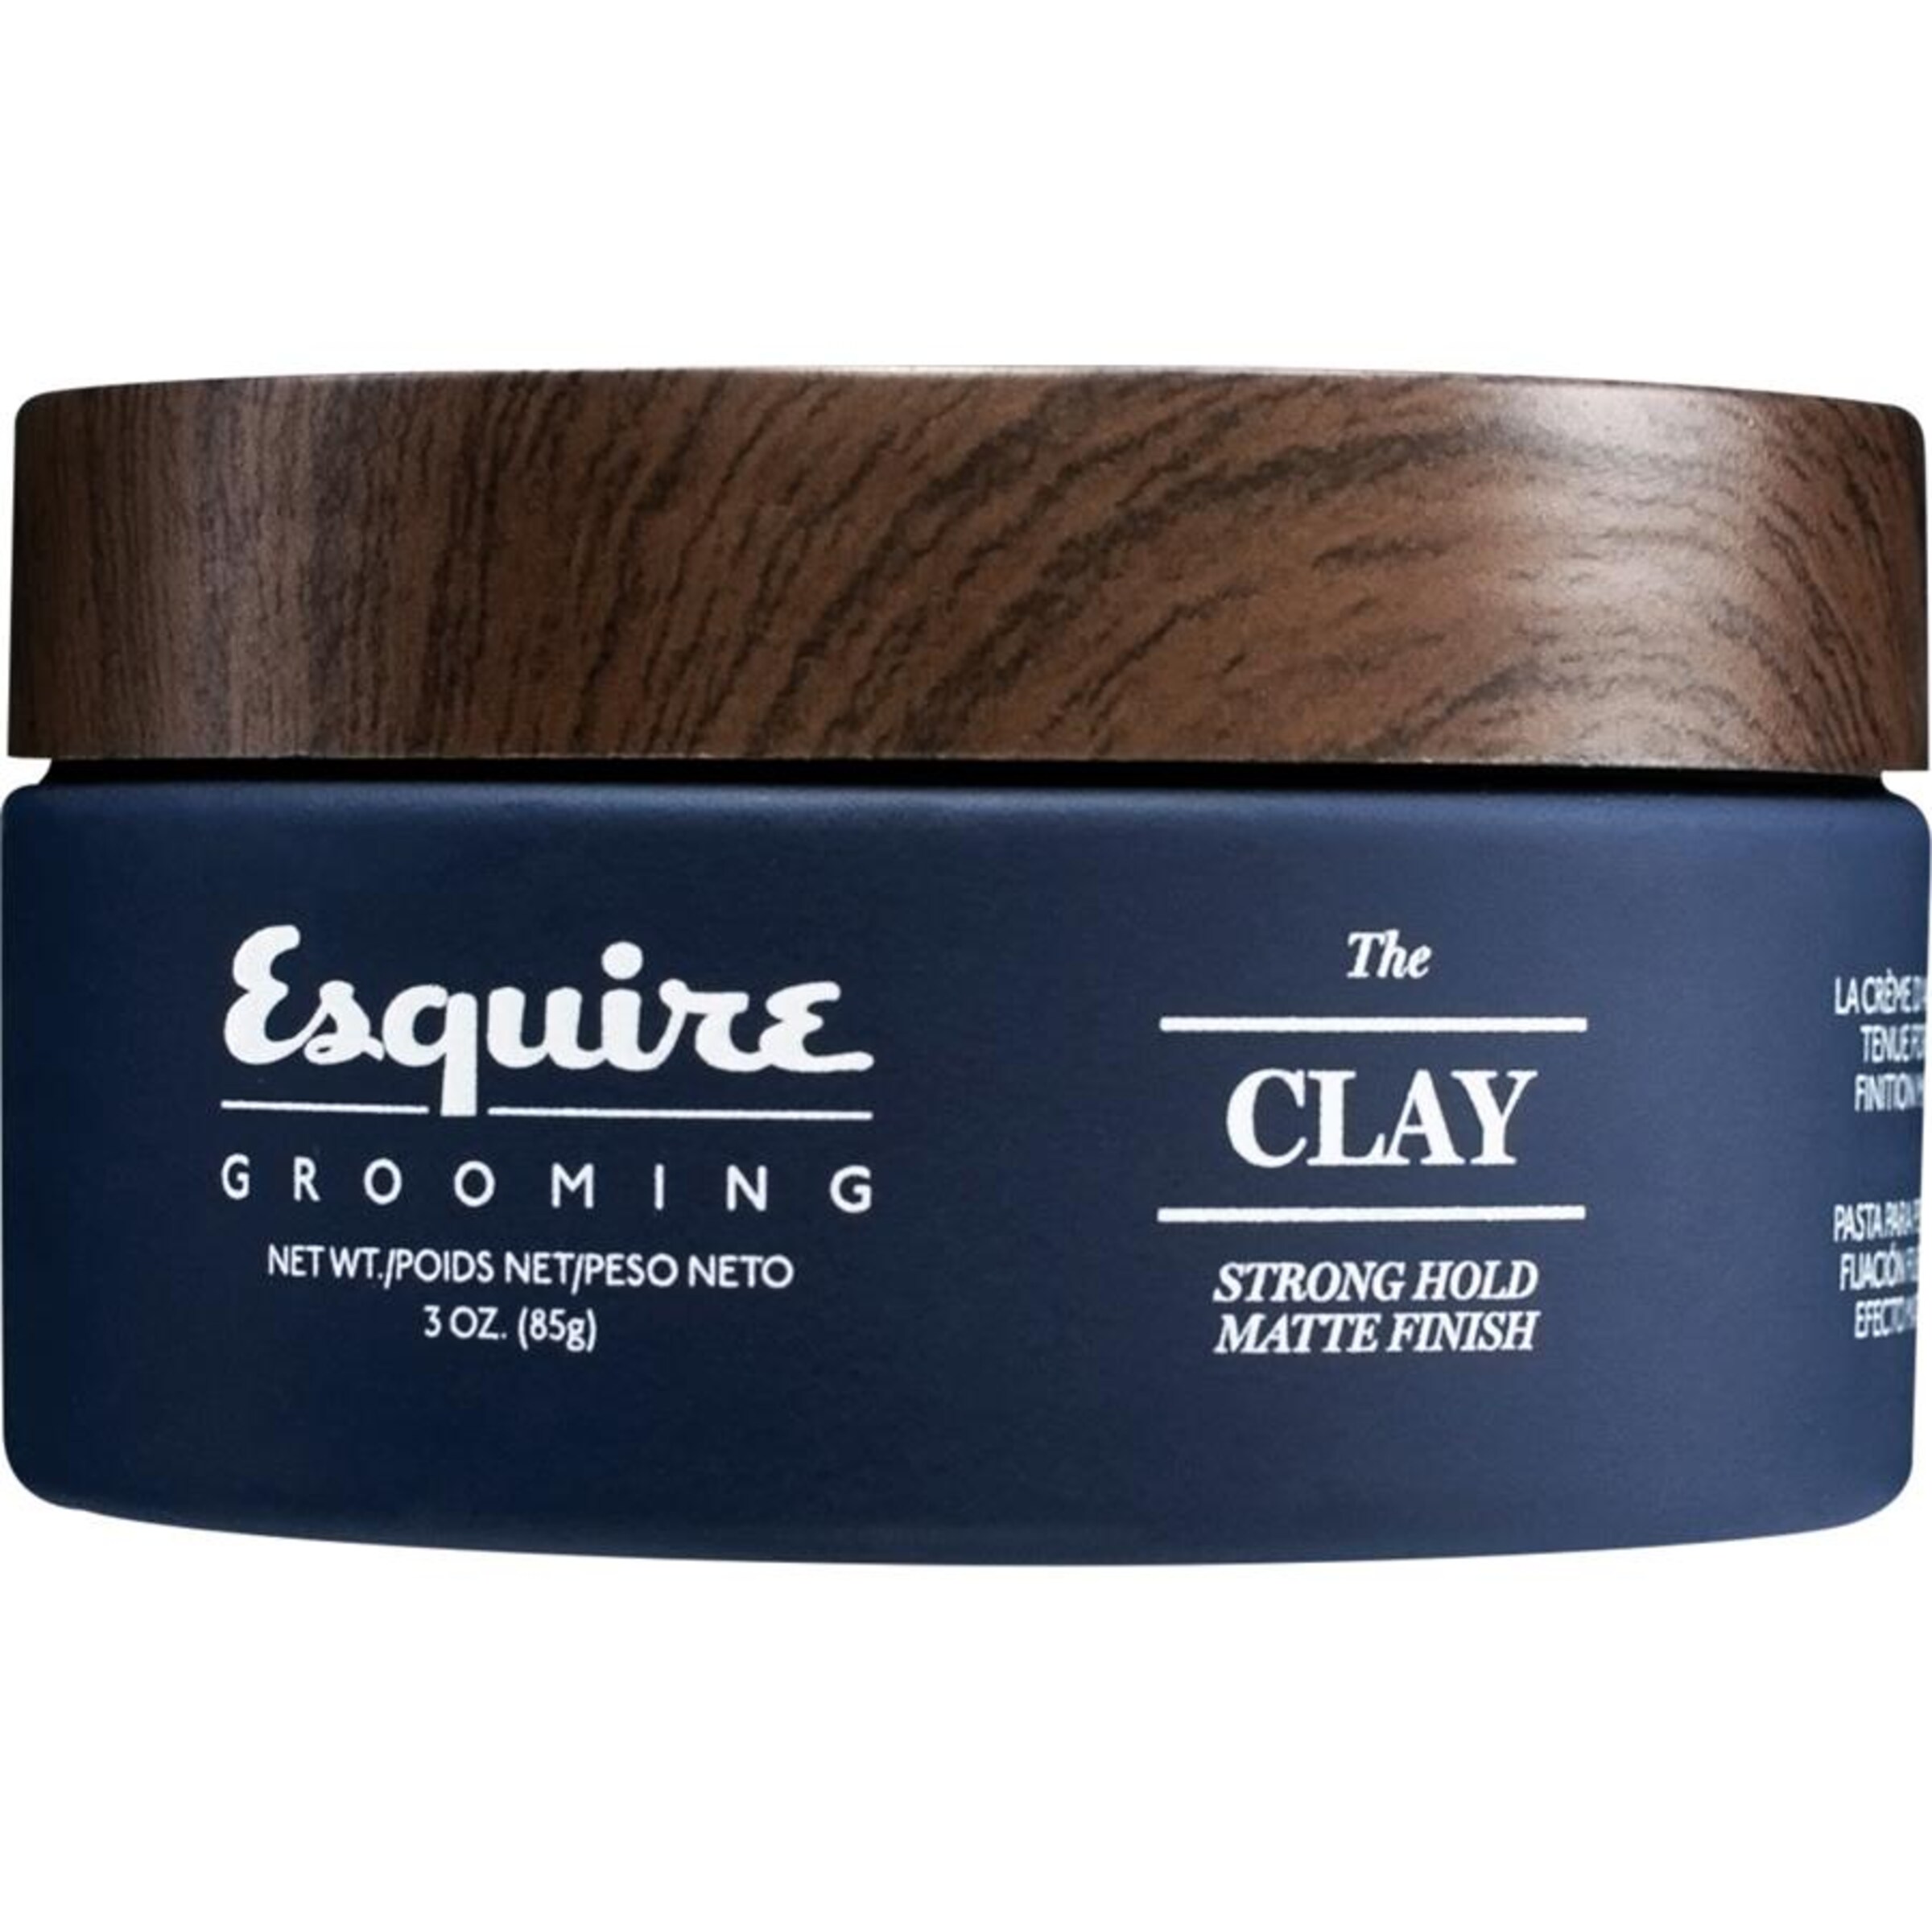 Esquire Grooming Haarwachs The Clay in 